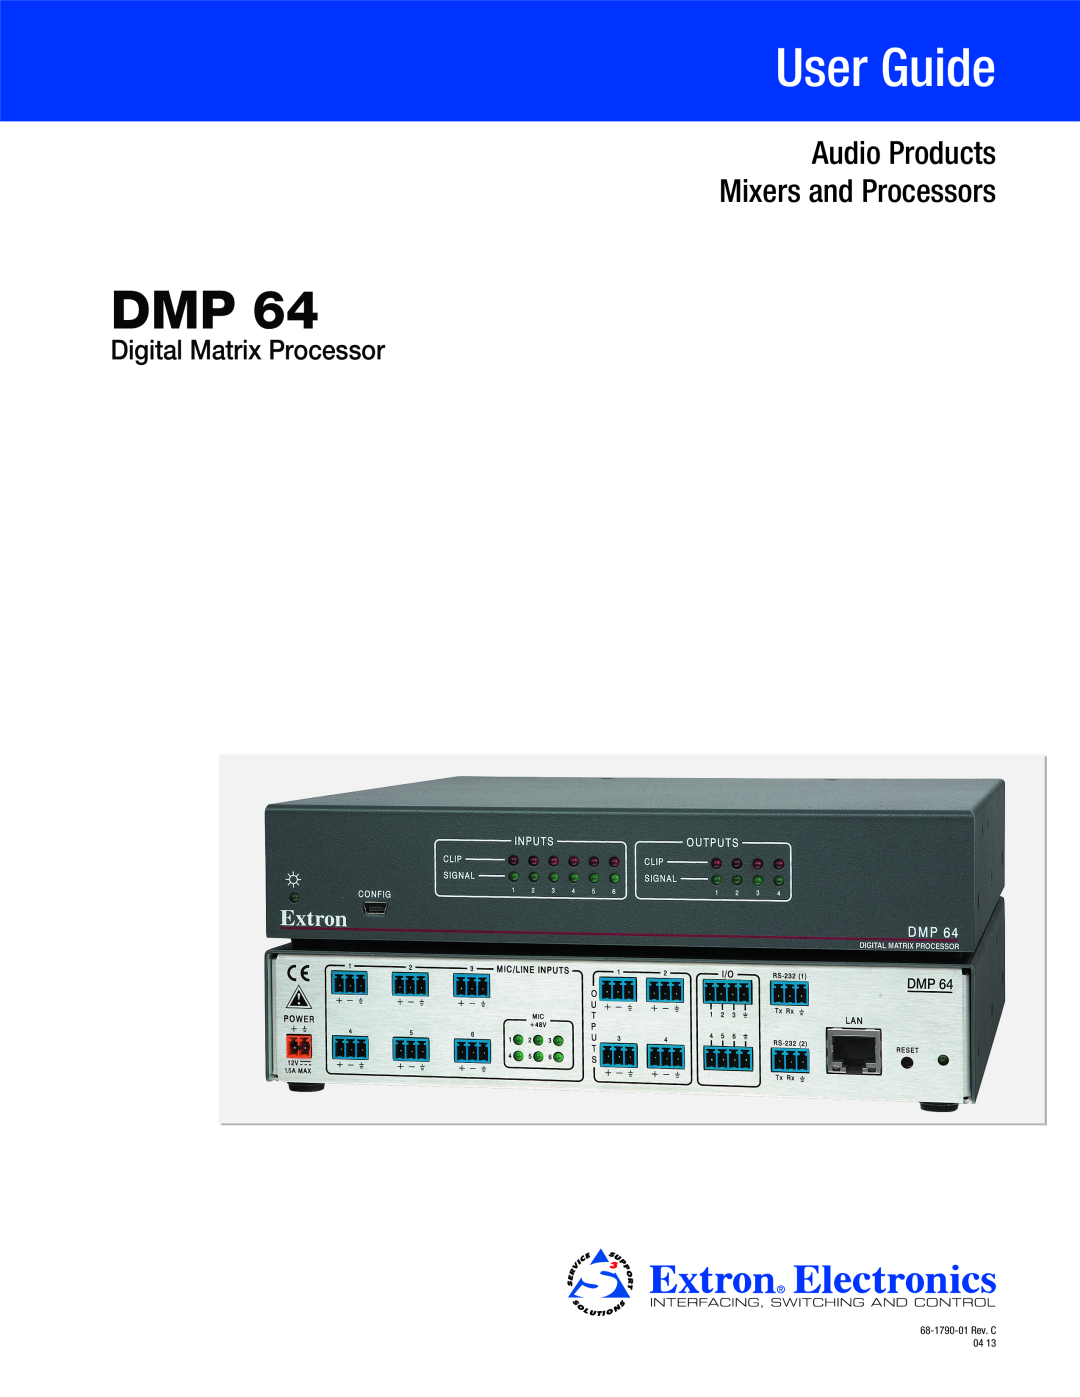 Extron electronic DMP 64 manual Audio Products Mixers and Processors, User Guide, Digital Matrix Processor 